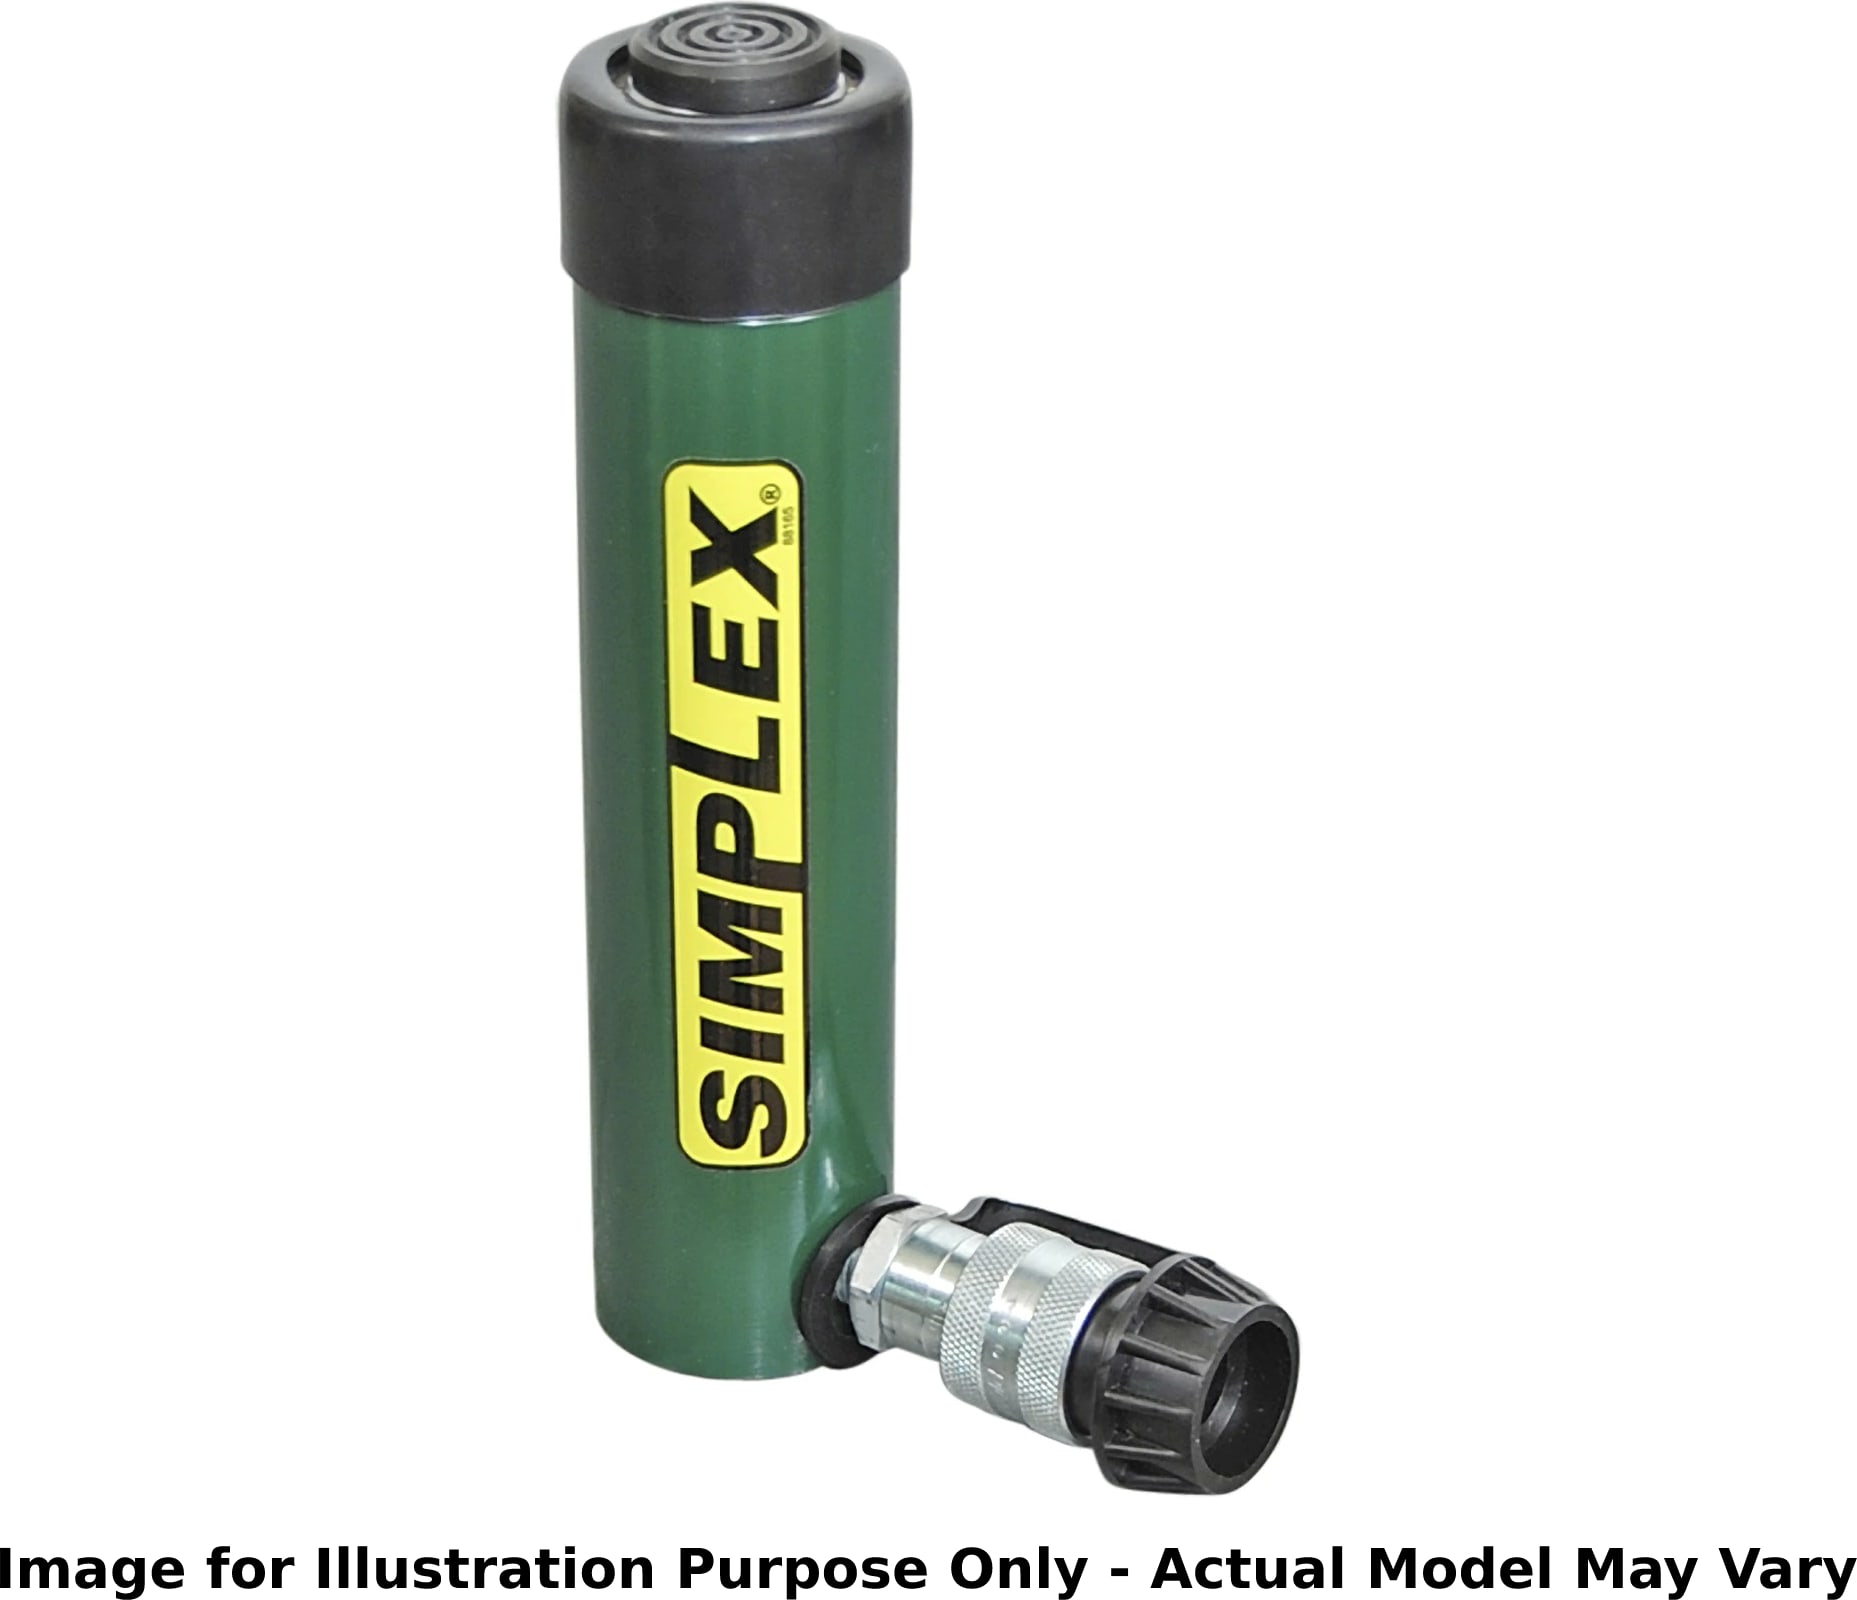 Enerpac R-Series General Purpose Cylinders - Image for Illustration Purpose Only